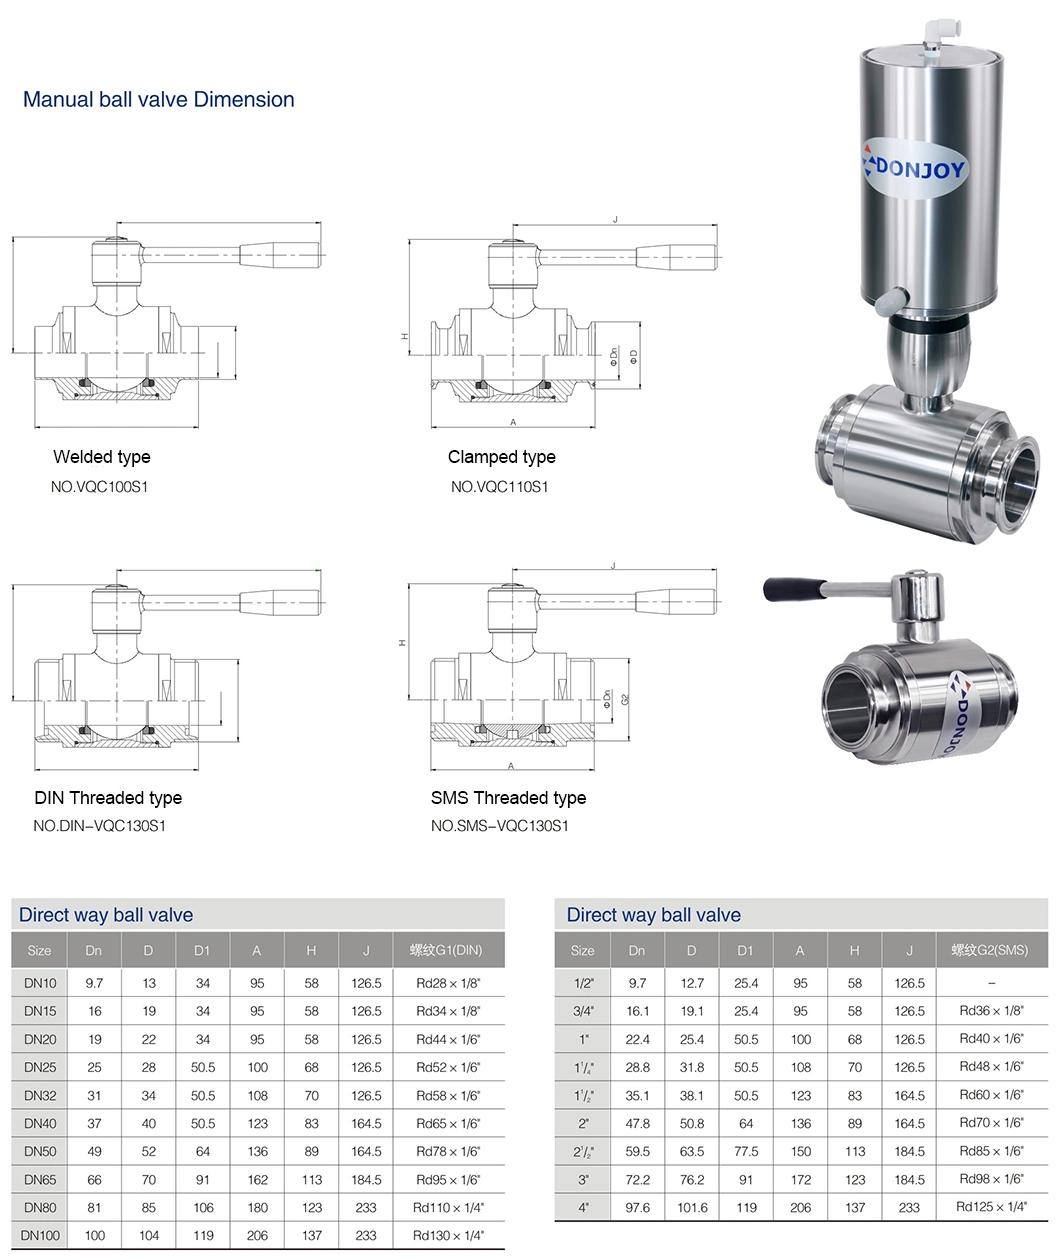 Hygienic Middle Clamp Ball Valve with Positoner